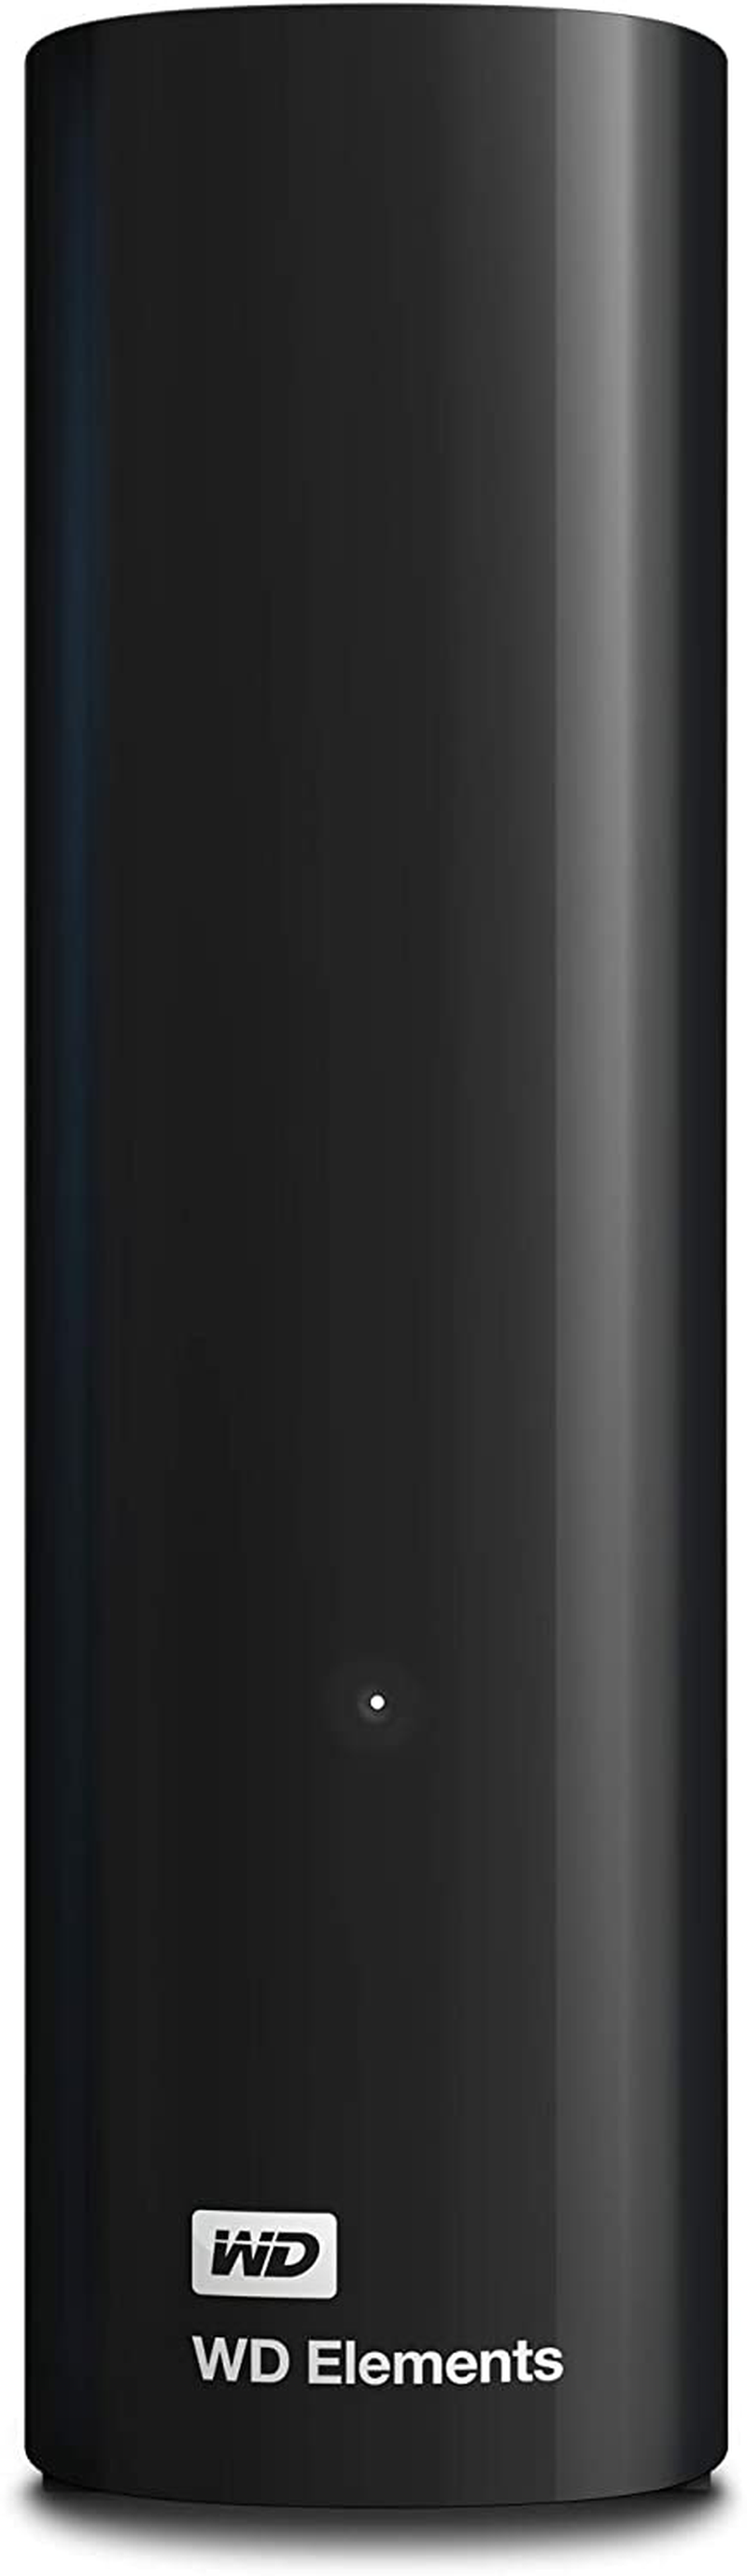 WD 6TB Elements Desktop Hard Drive HDD, USB 3.0, Compatible with PC, Mac, PS4 & Xbox - WDBWLG0060HBK-NESN